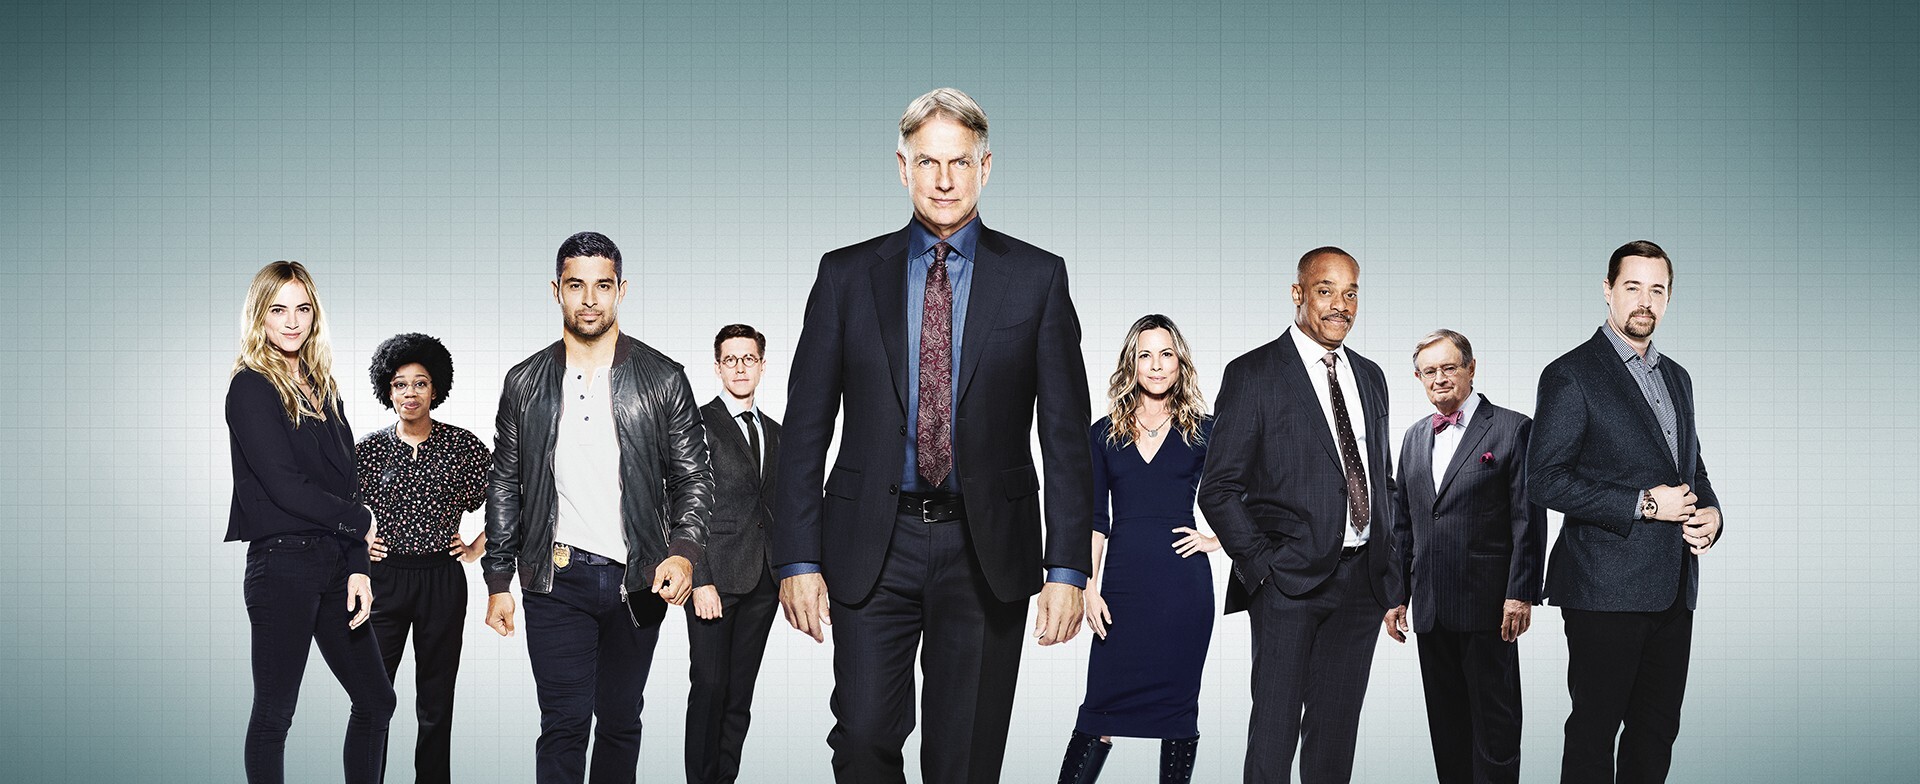 Where to watch NCIS season 3 in streaming BetaSeries image